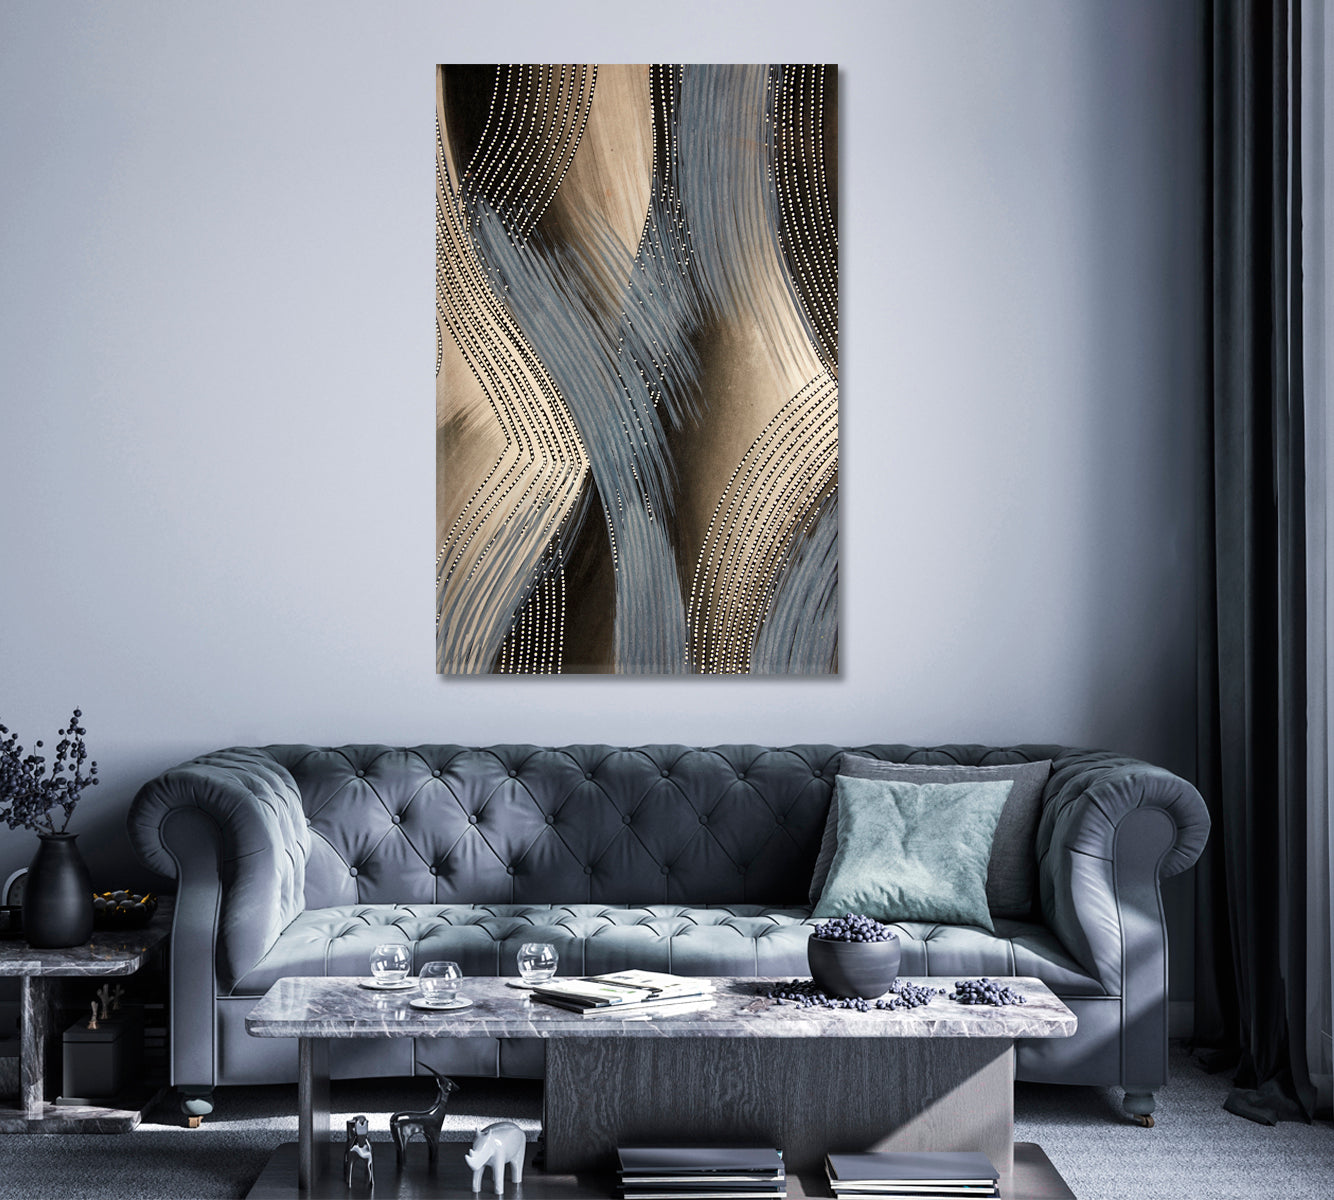 Abstract Stylish Waves Pattern Canvas Print ArtLexy 1 Panel 16"x24" inches 